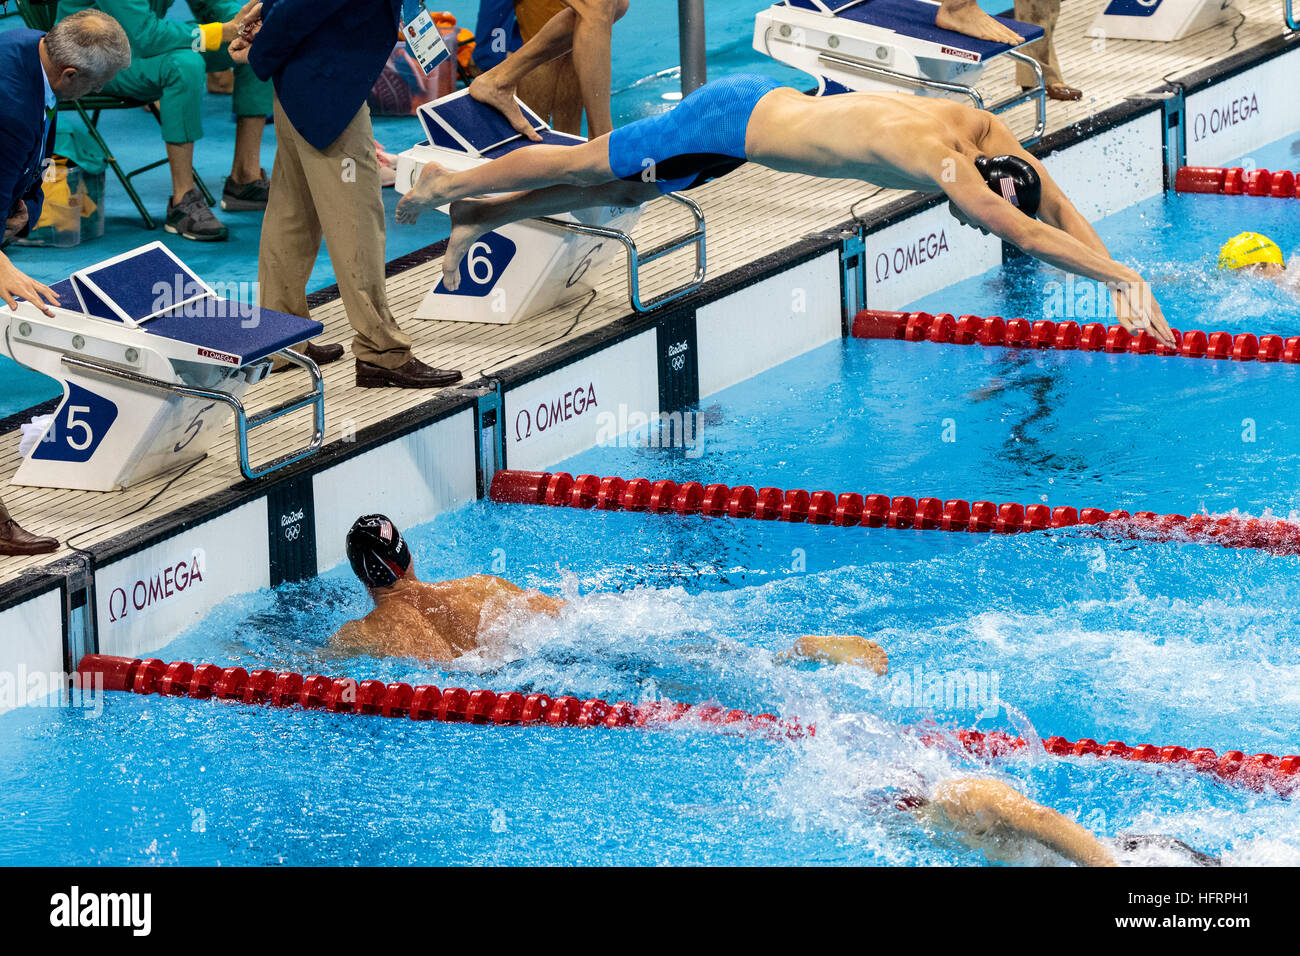 Rio de Janeiro, Brazil. 9 August 2016.   Francis Haas Team USA gold medal winners competing in the final of the Men's 4x200m freestyle relay at the 20 Stock Photo